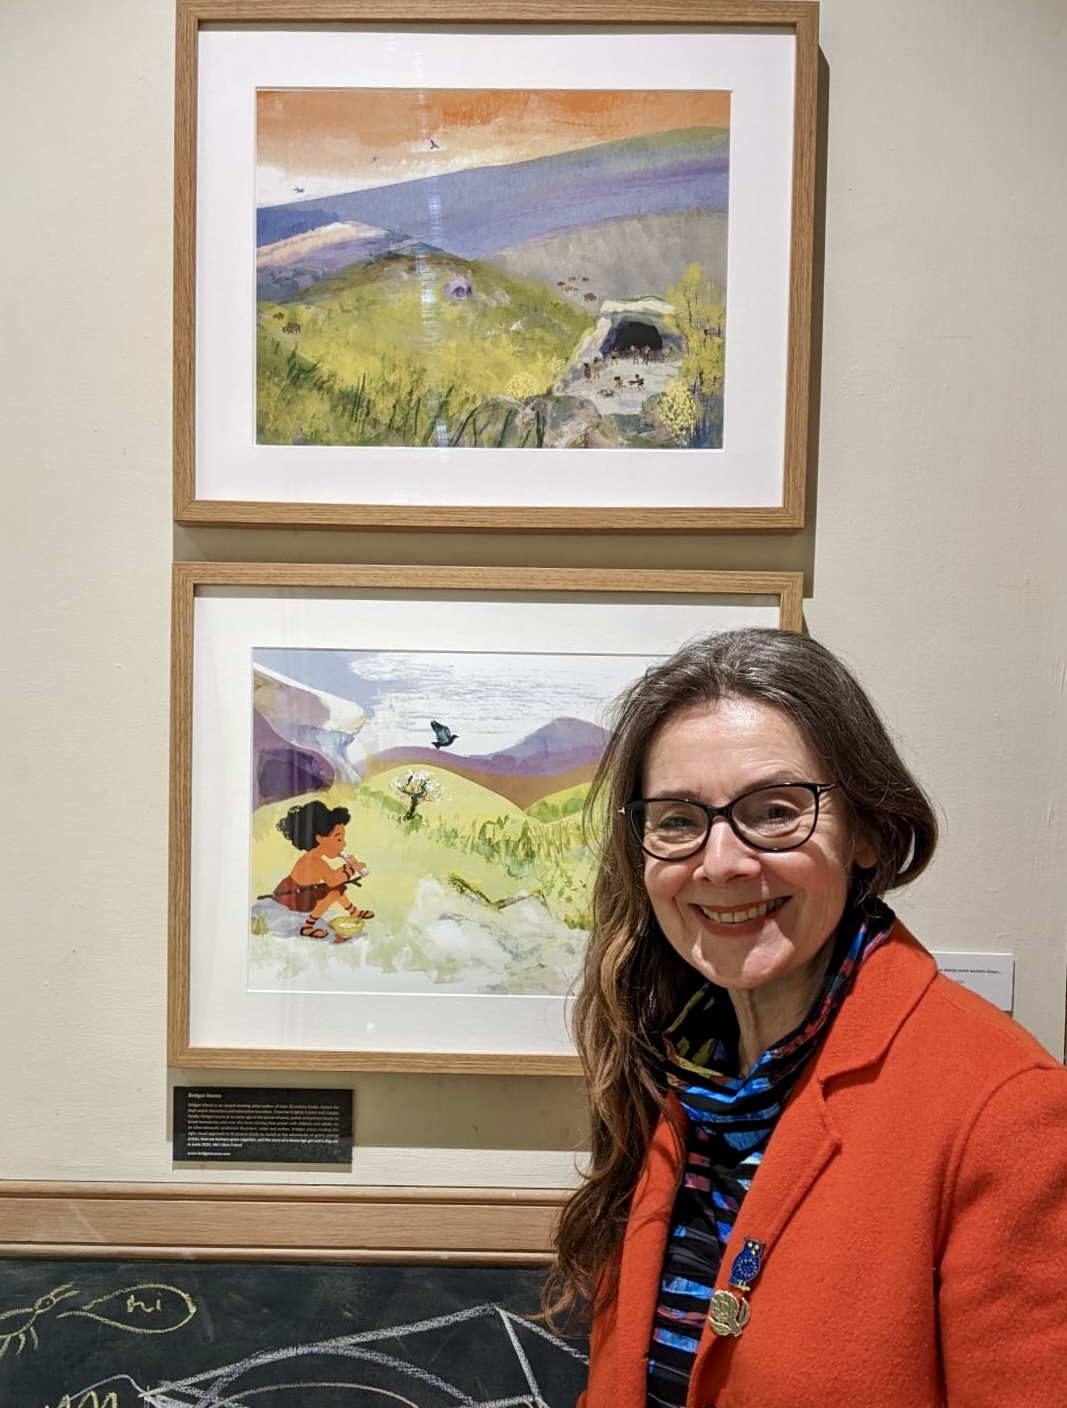 Bridget standing in front of 2 framed illustrations of landscapes from her book Mo's Best Friend, A Stone Age Story